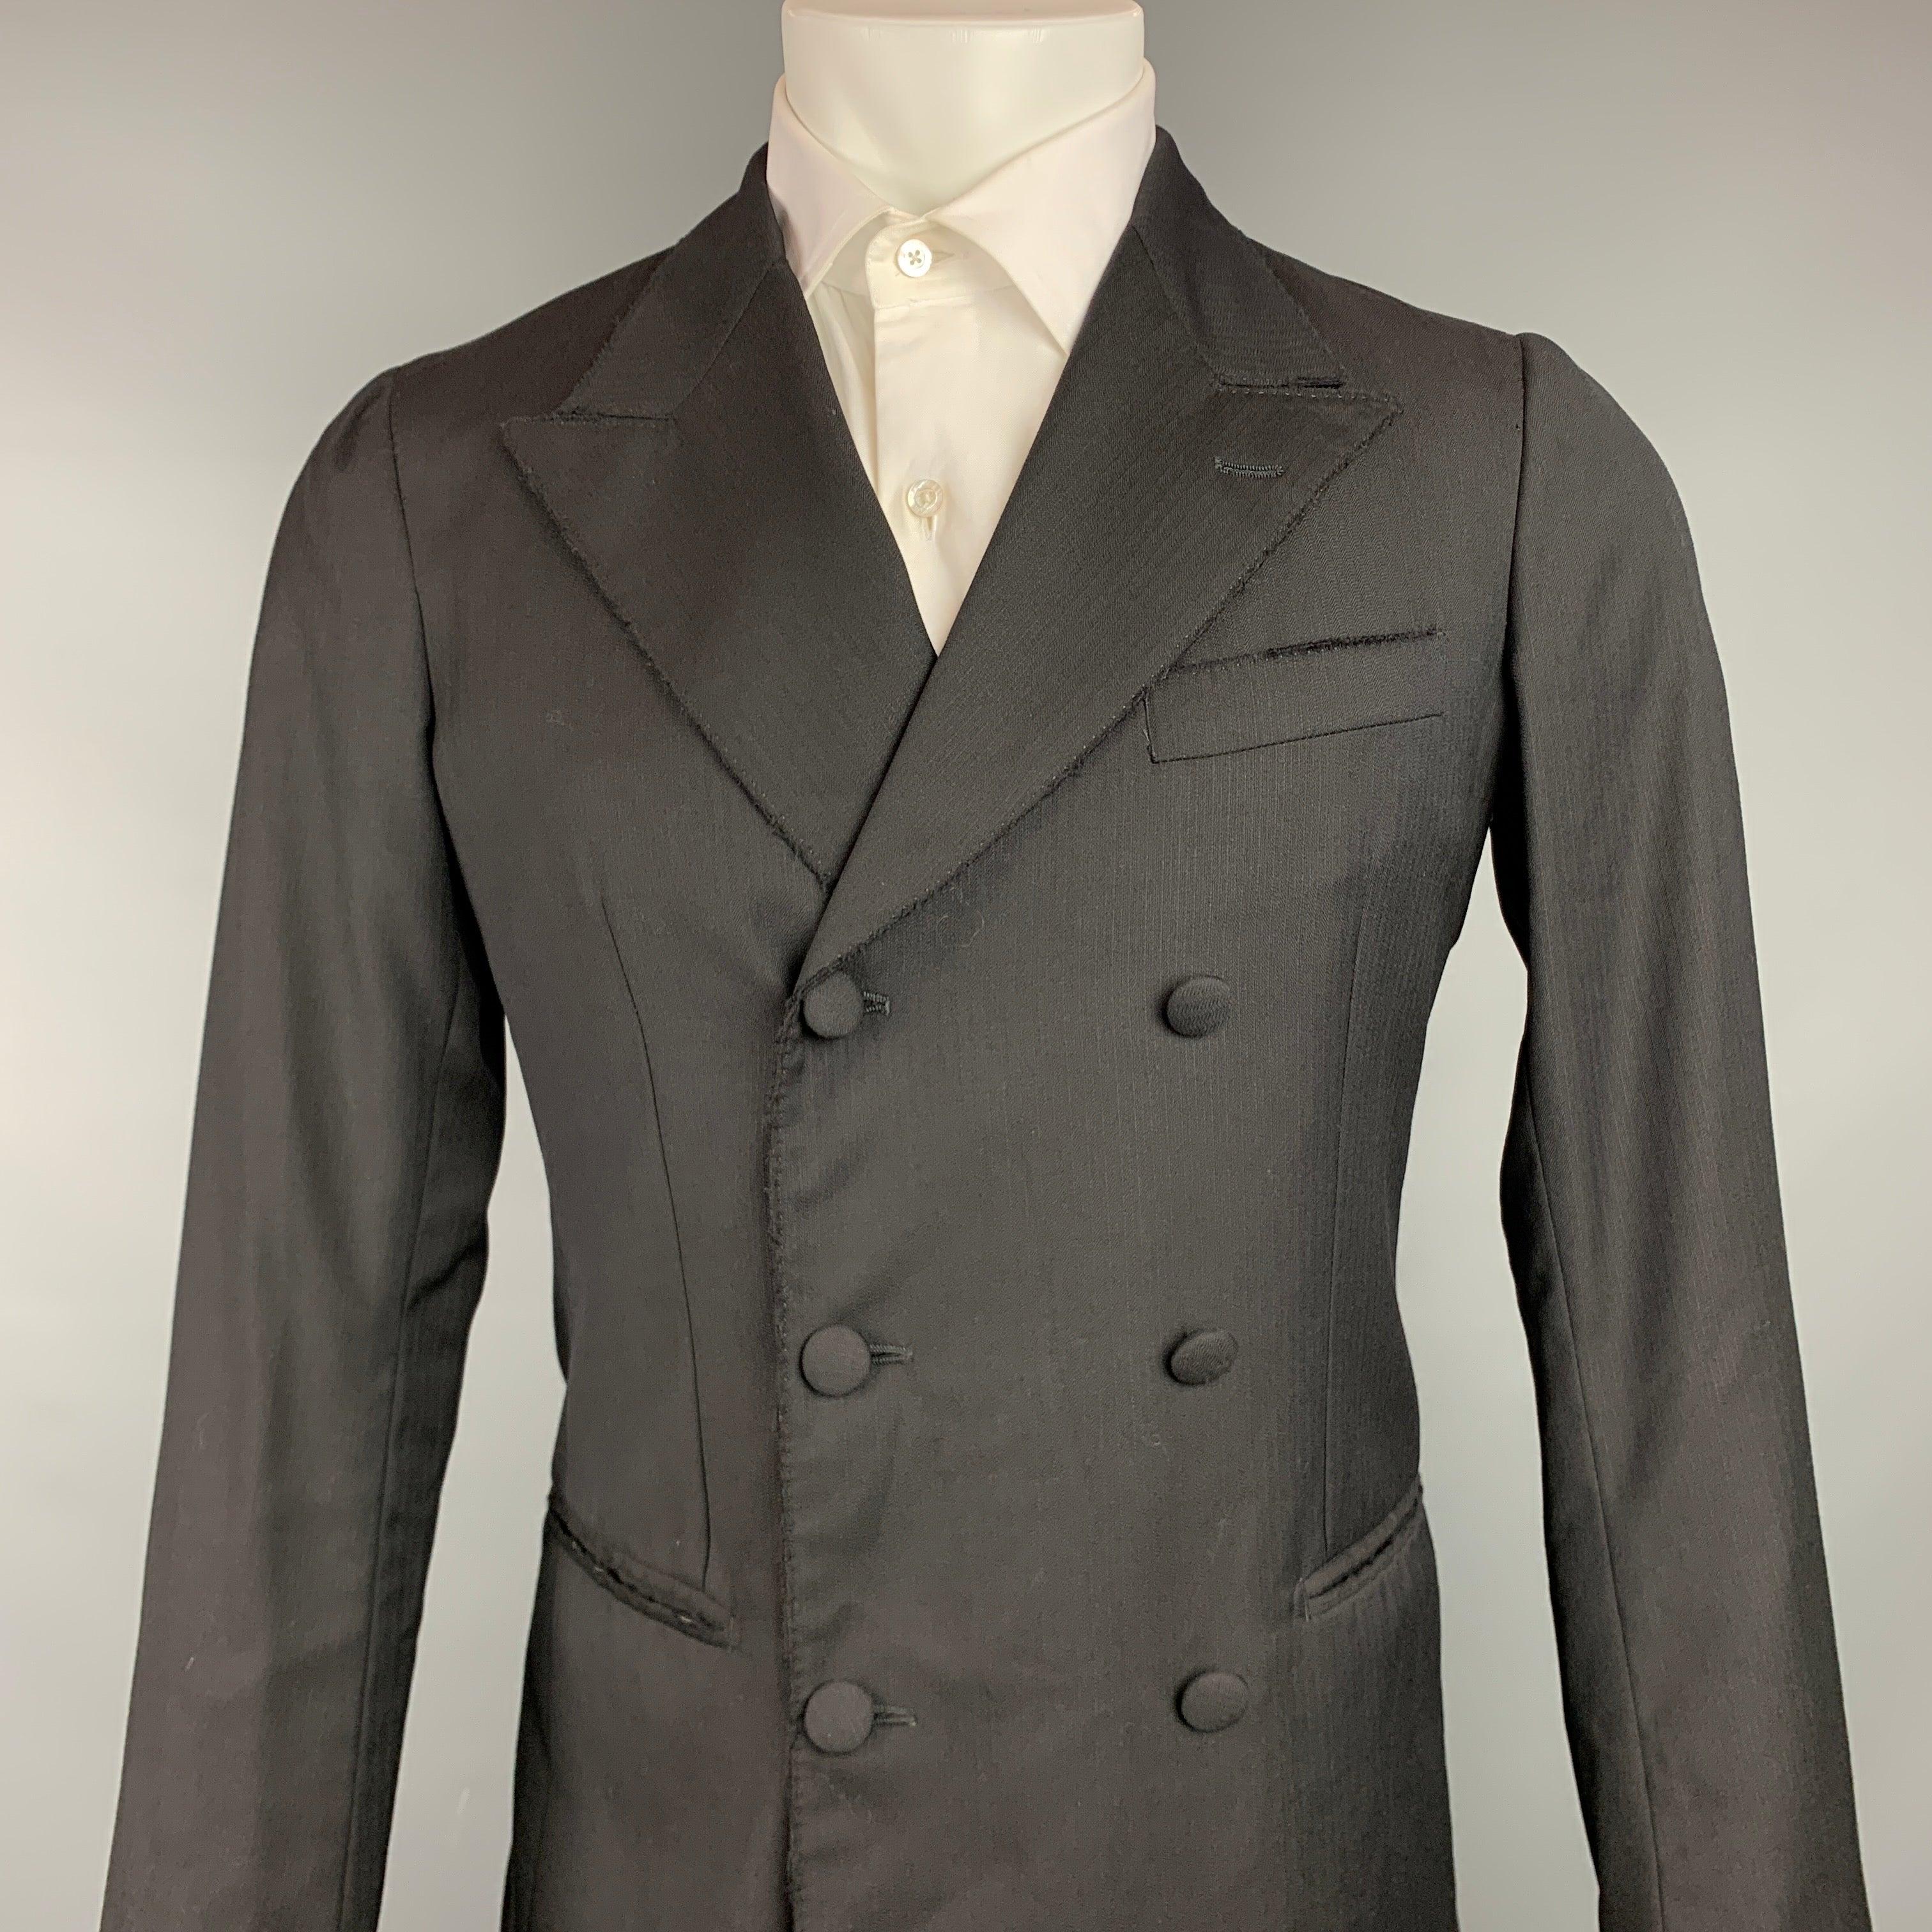 DOLCE & GABBANA
sport coat comes in a black wool with a full liner featuring a peak lapel, slit pockets, and double breasted closure. Made in Italy.Very Good Pre-Owned Condition. 

Marked:   48 

Measurements: 
 
Shoulder: 16.5 inches  Chest: 38